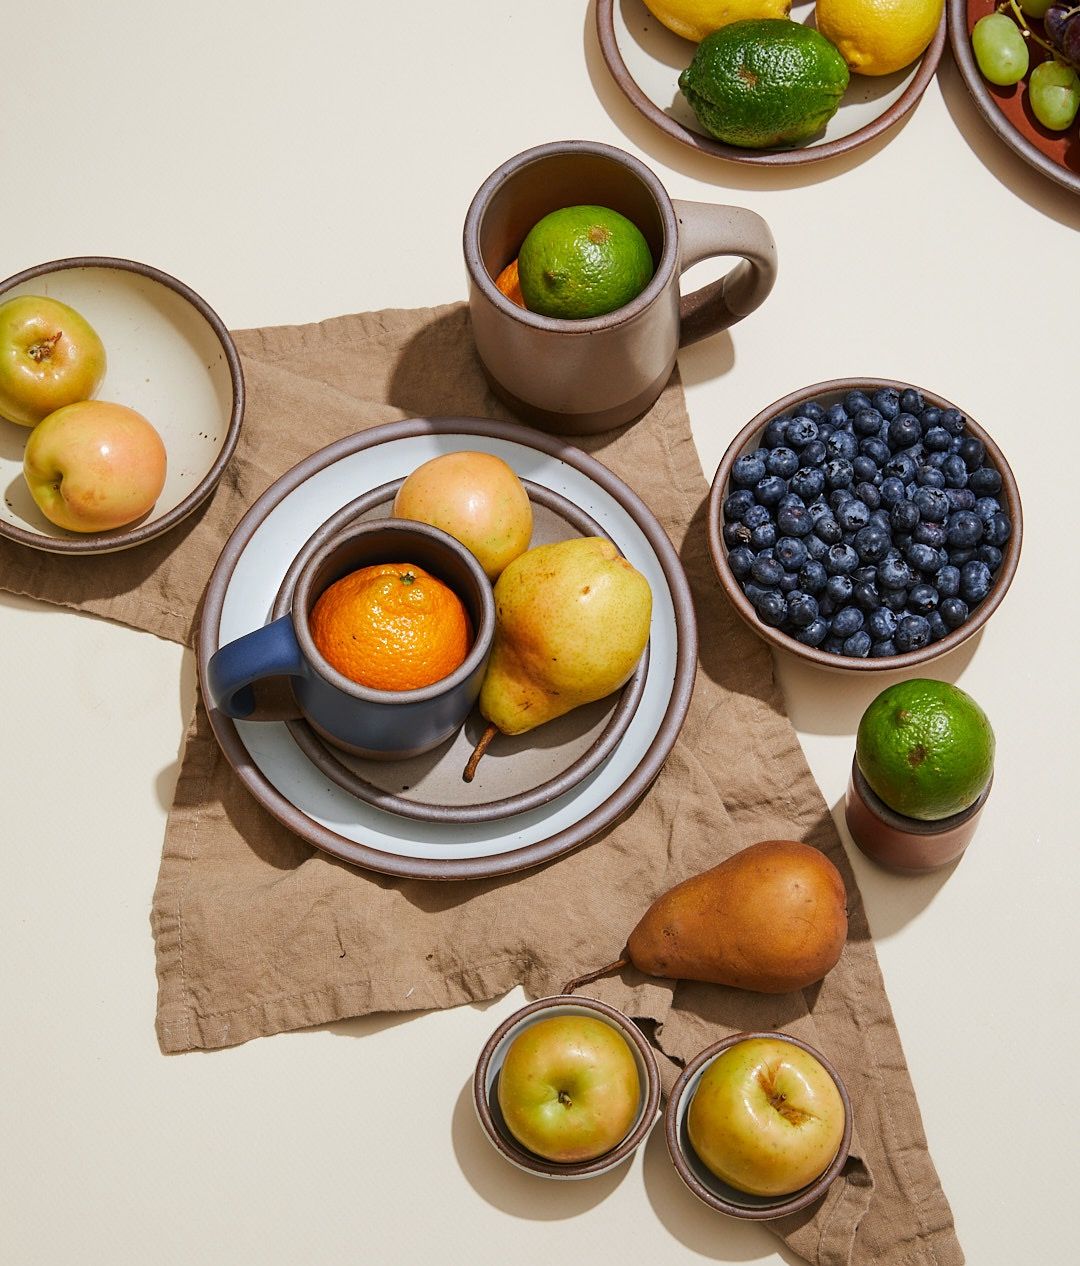 Overhead view of ceramic bowls, plates, and mugs in neutral colors filled with fruits and sitting on a linen napkin